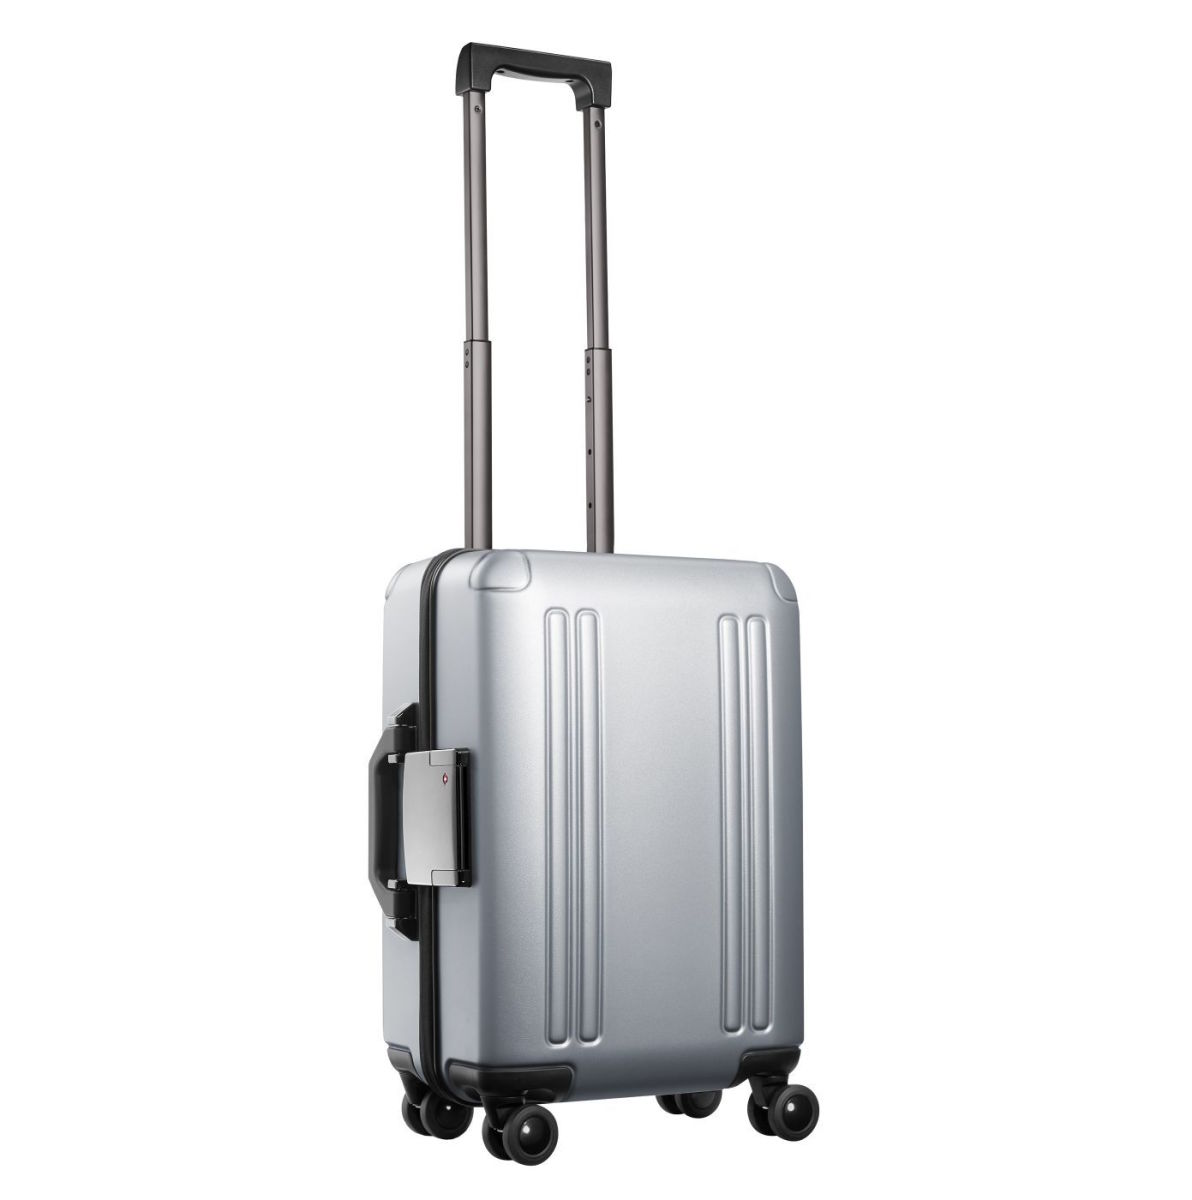 Zero's new ZRO line of luggage focuses on form and function - Acquire